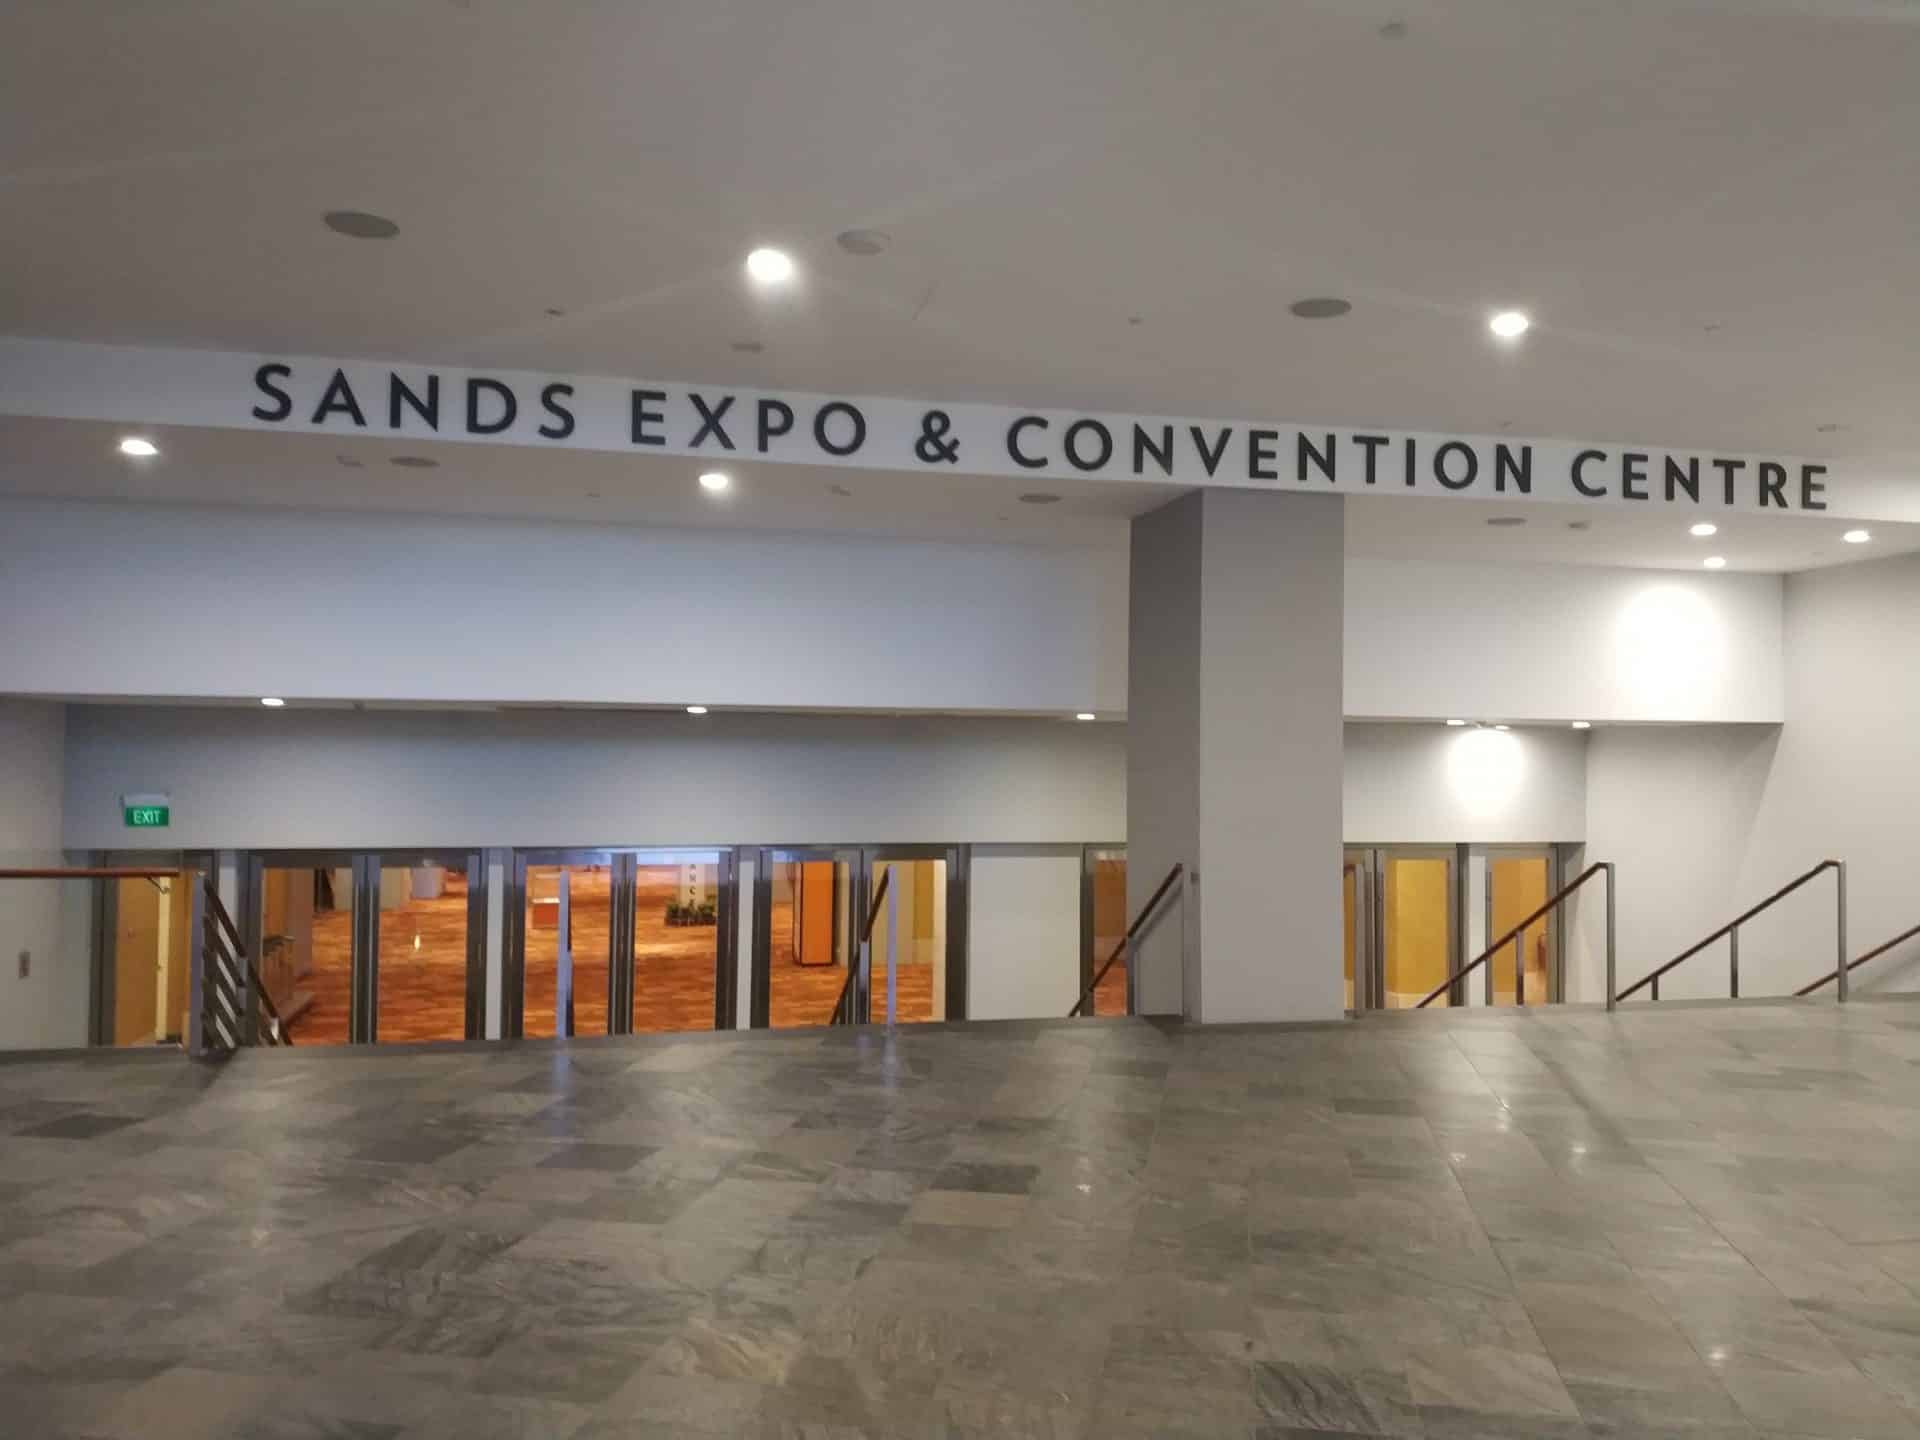 Sands Expo and Convention Center Floor Plan & Address, Singapore